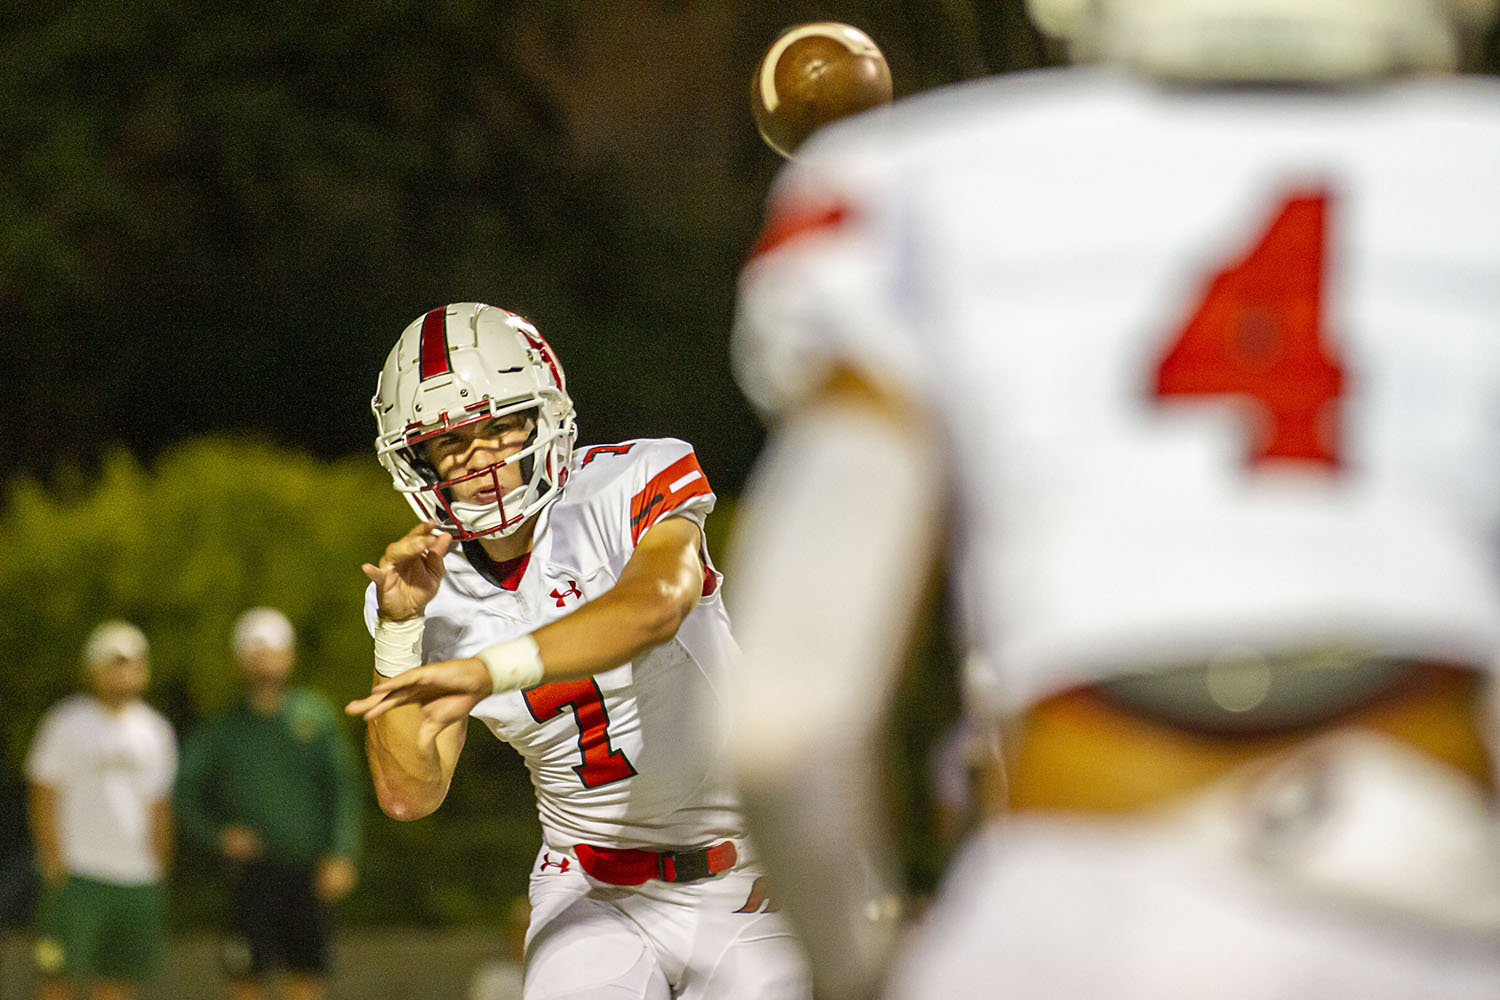 Amid a season of hardship, Hewitt-Trussville can only press on with trip to Tuscaloosa County